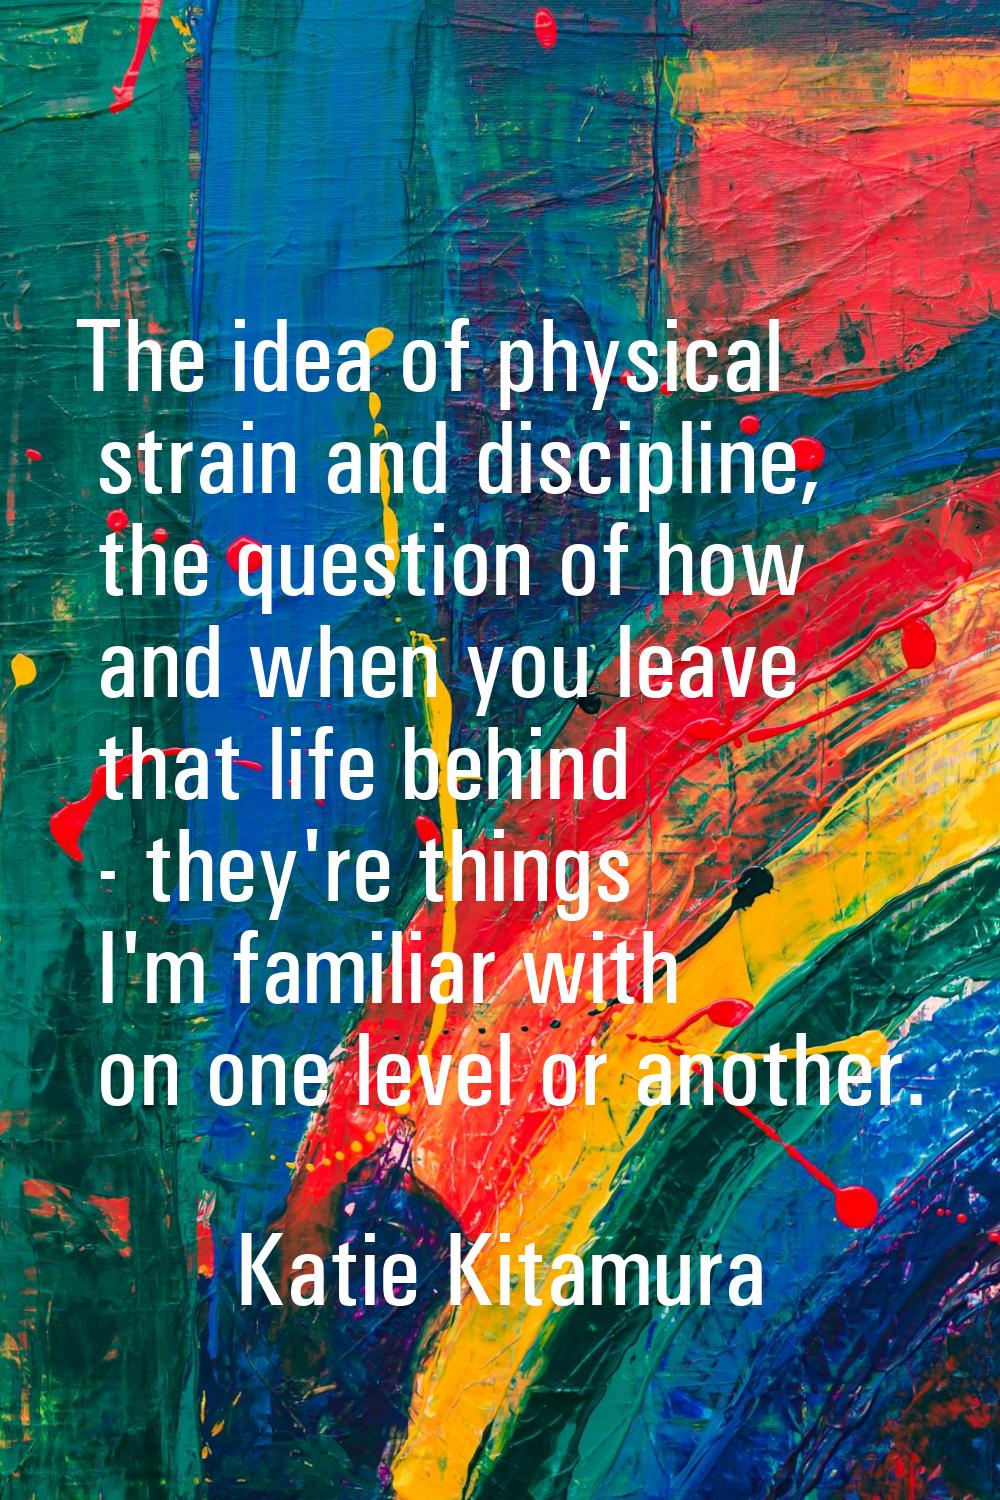 The idea of physical strain and discipline, the question of how and when you leave that life behind